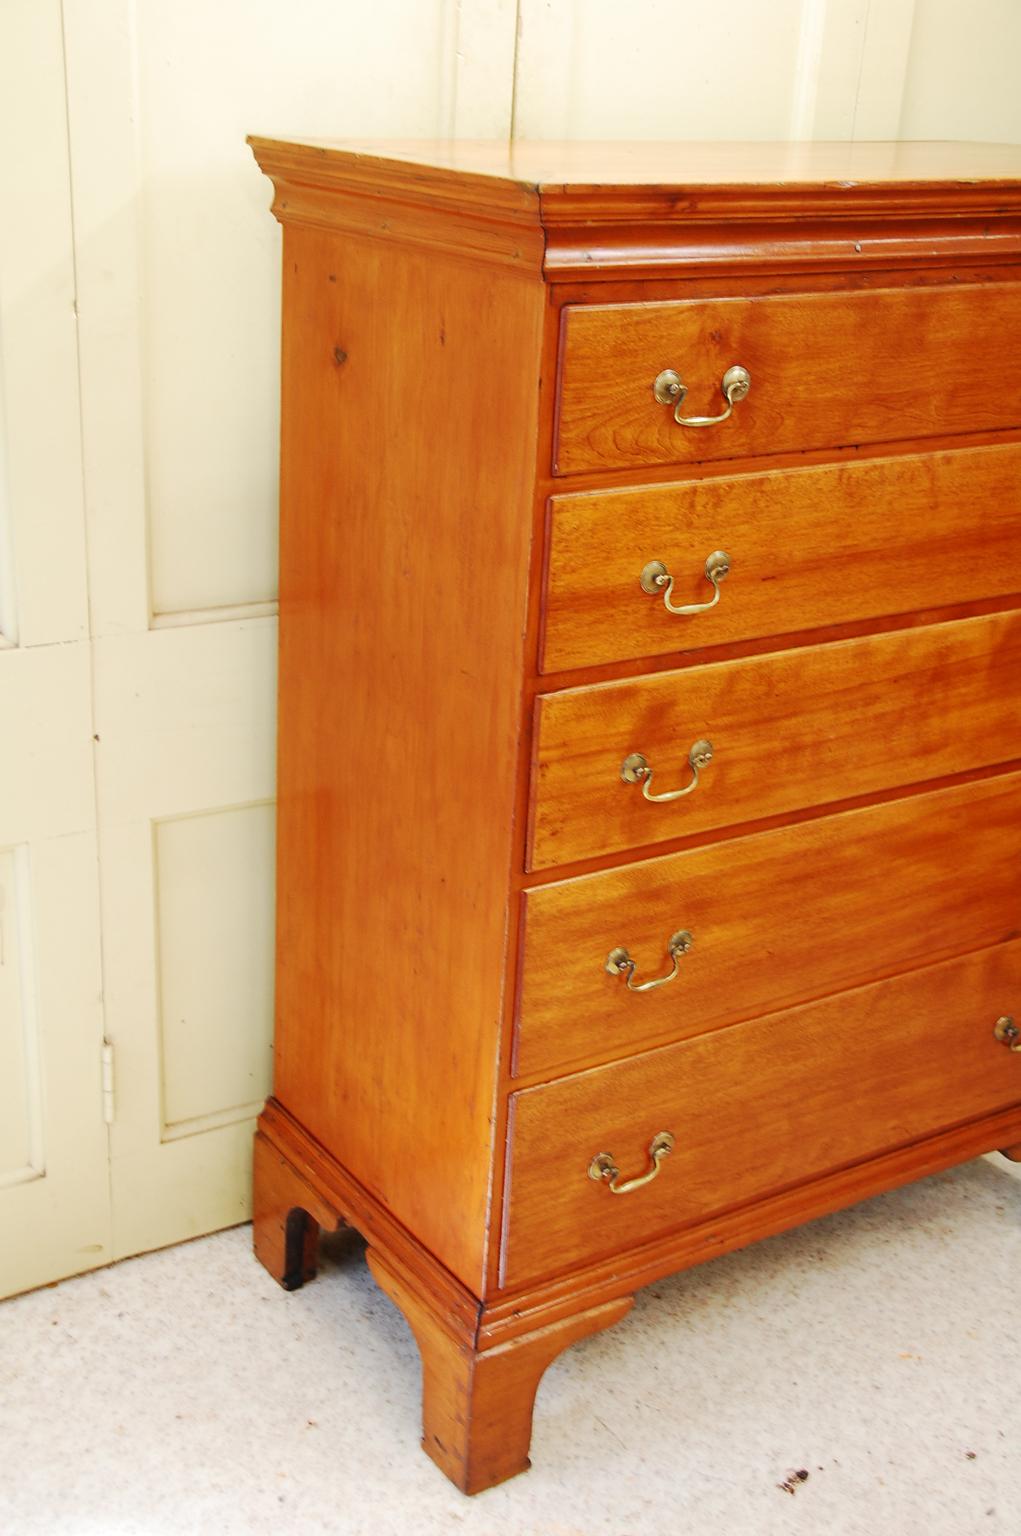 American Federal period chippendale birch and pine tall chest of five graduated drawers with bracket base. Each drawer has a molded edge and the secondary wood is basswood, which is a very clean light colored hardwood. This chest is beautifully